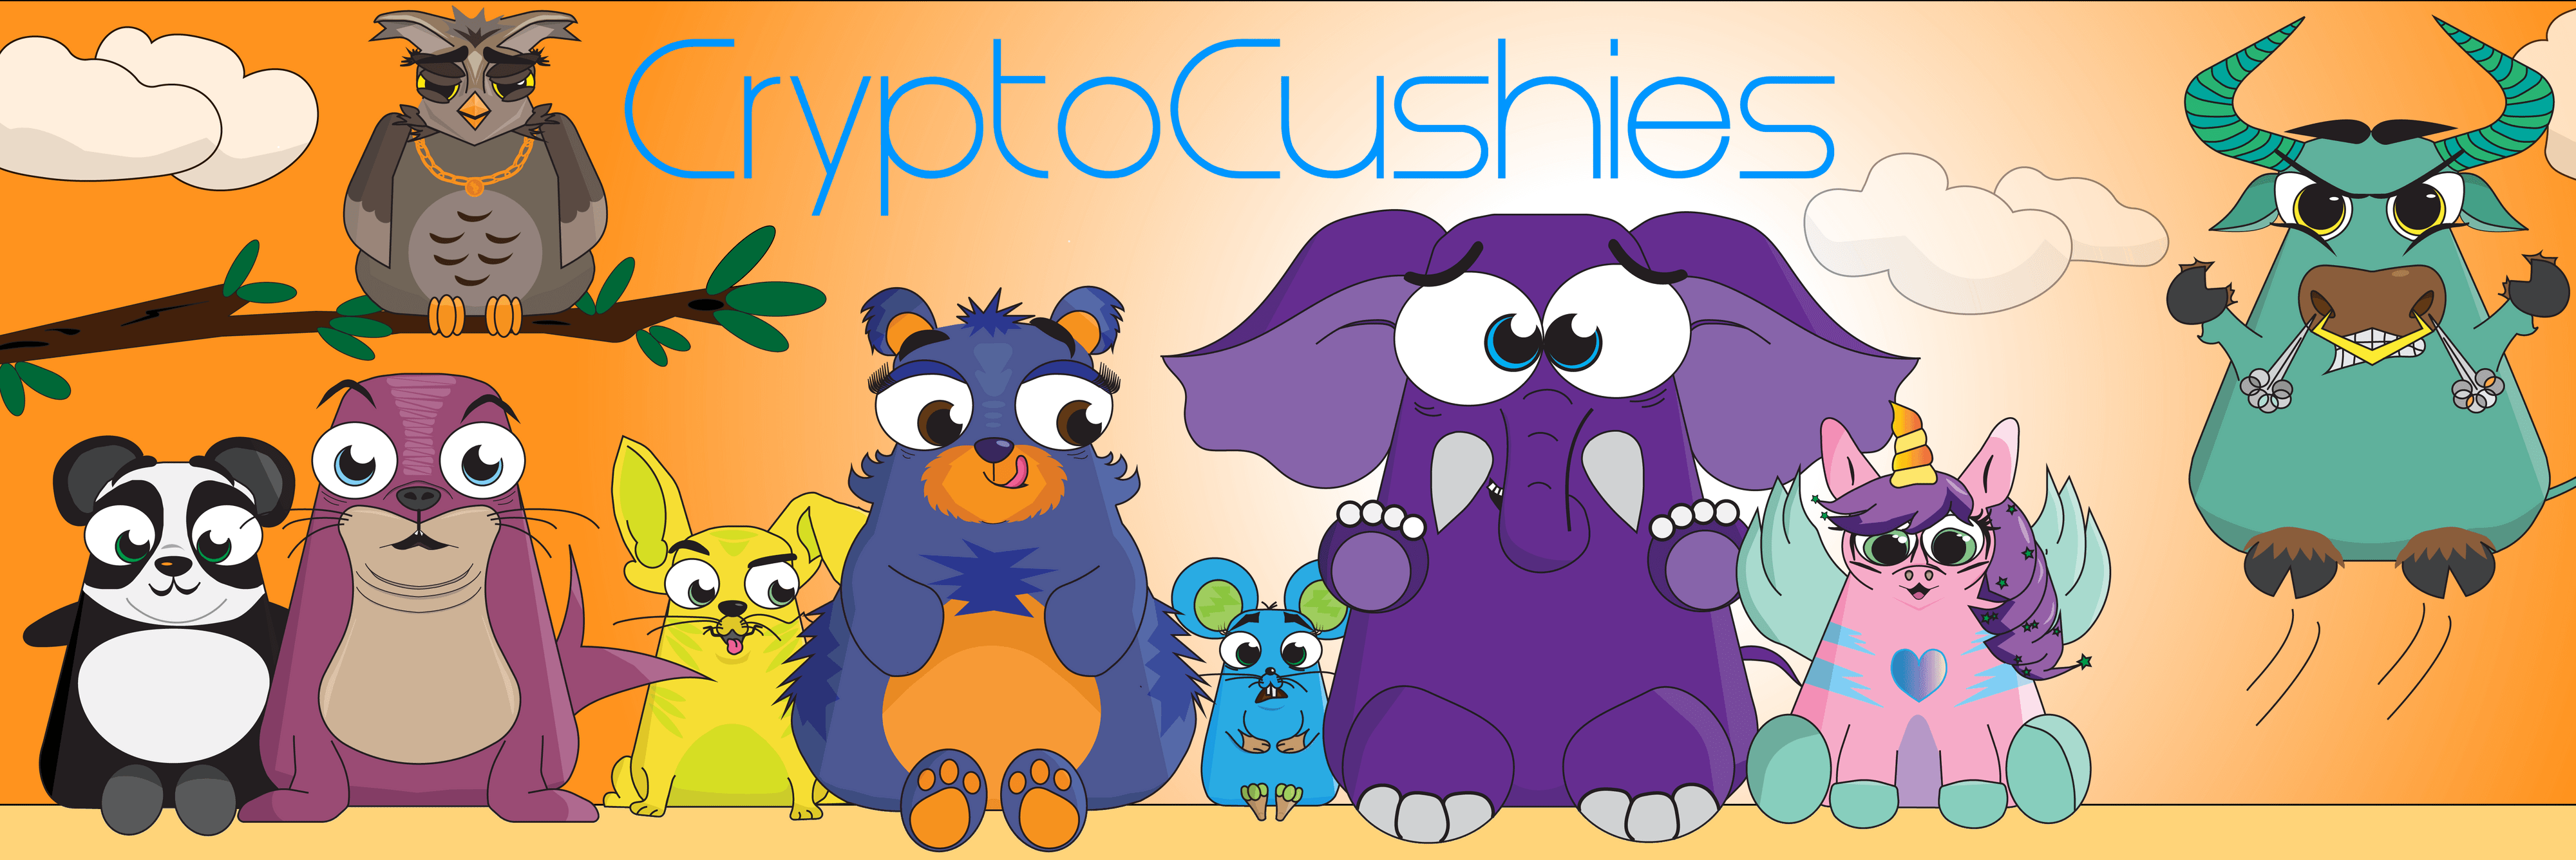 CryptoCushies banner